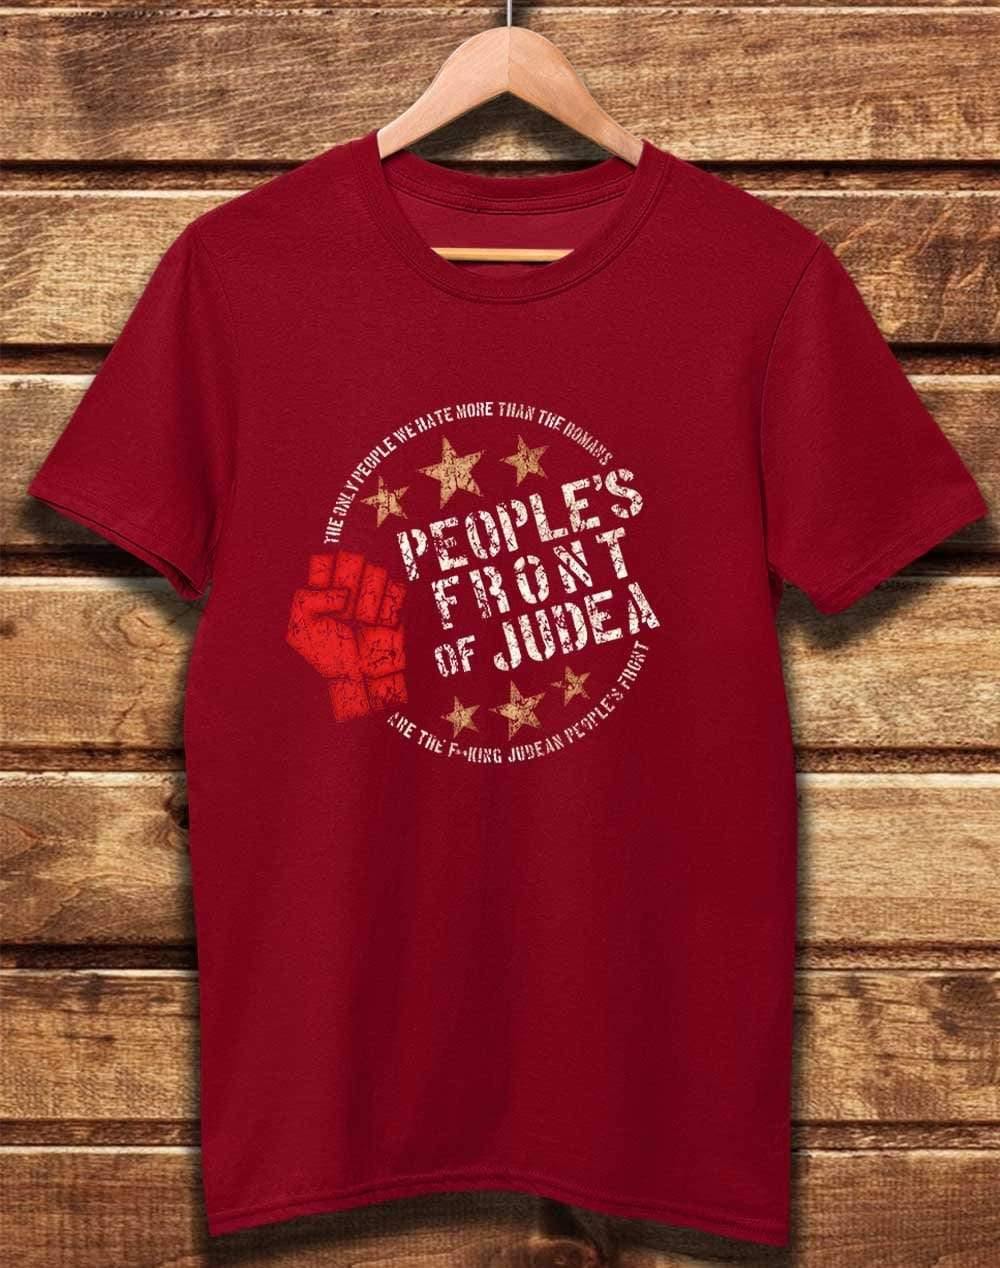 DELUXE People's Front of Judea Organic Cotton T-Shirt XS / Dark Red  - Off World Tees